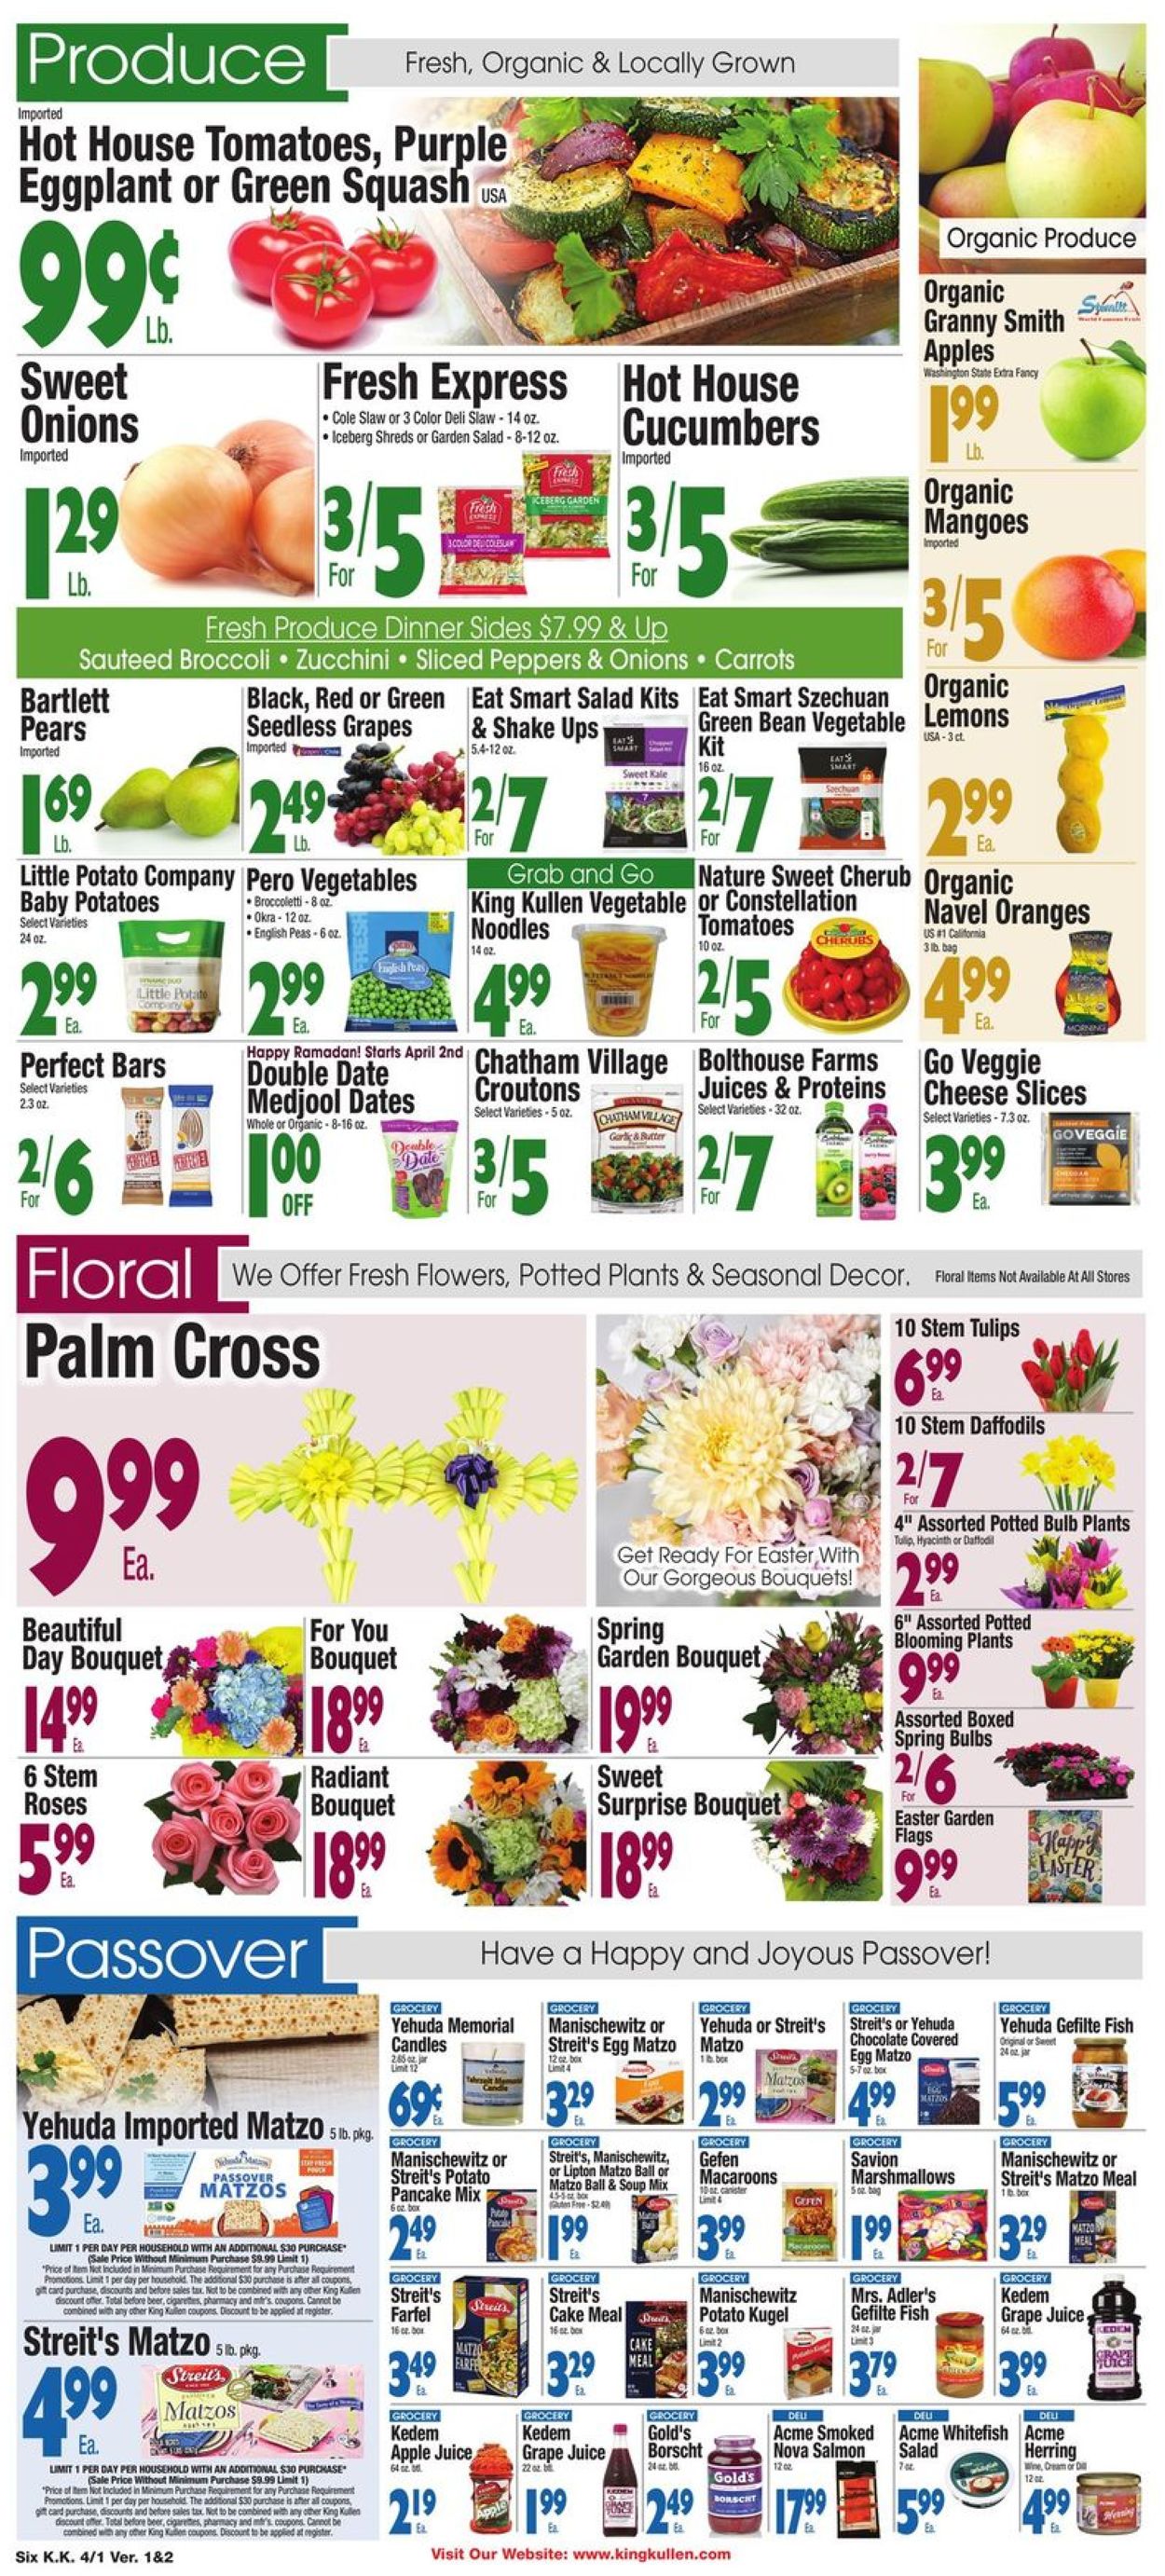 King Kullen Ad from 04/01/2022